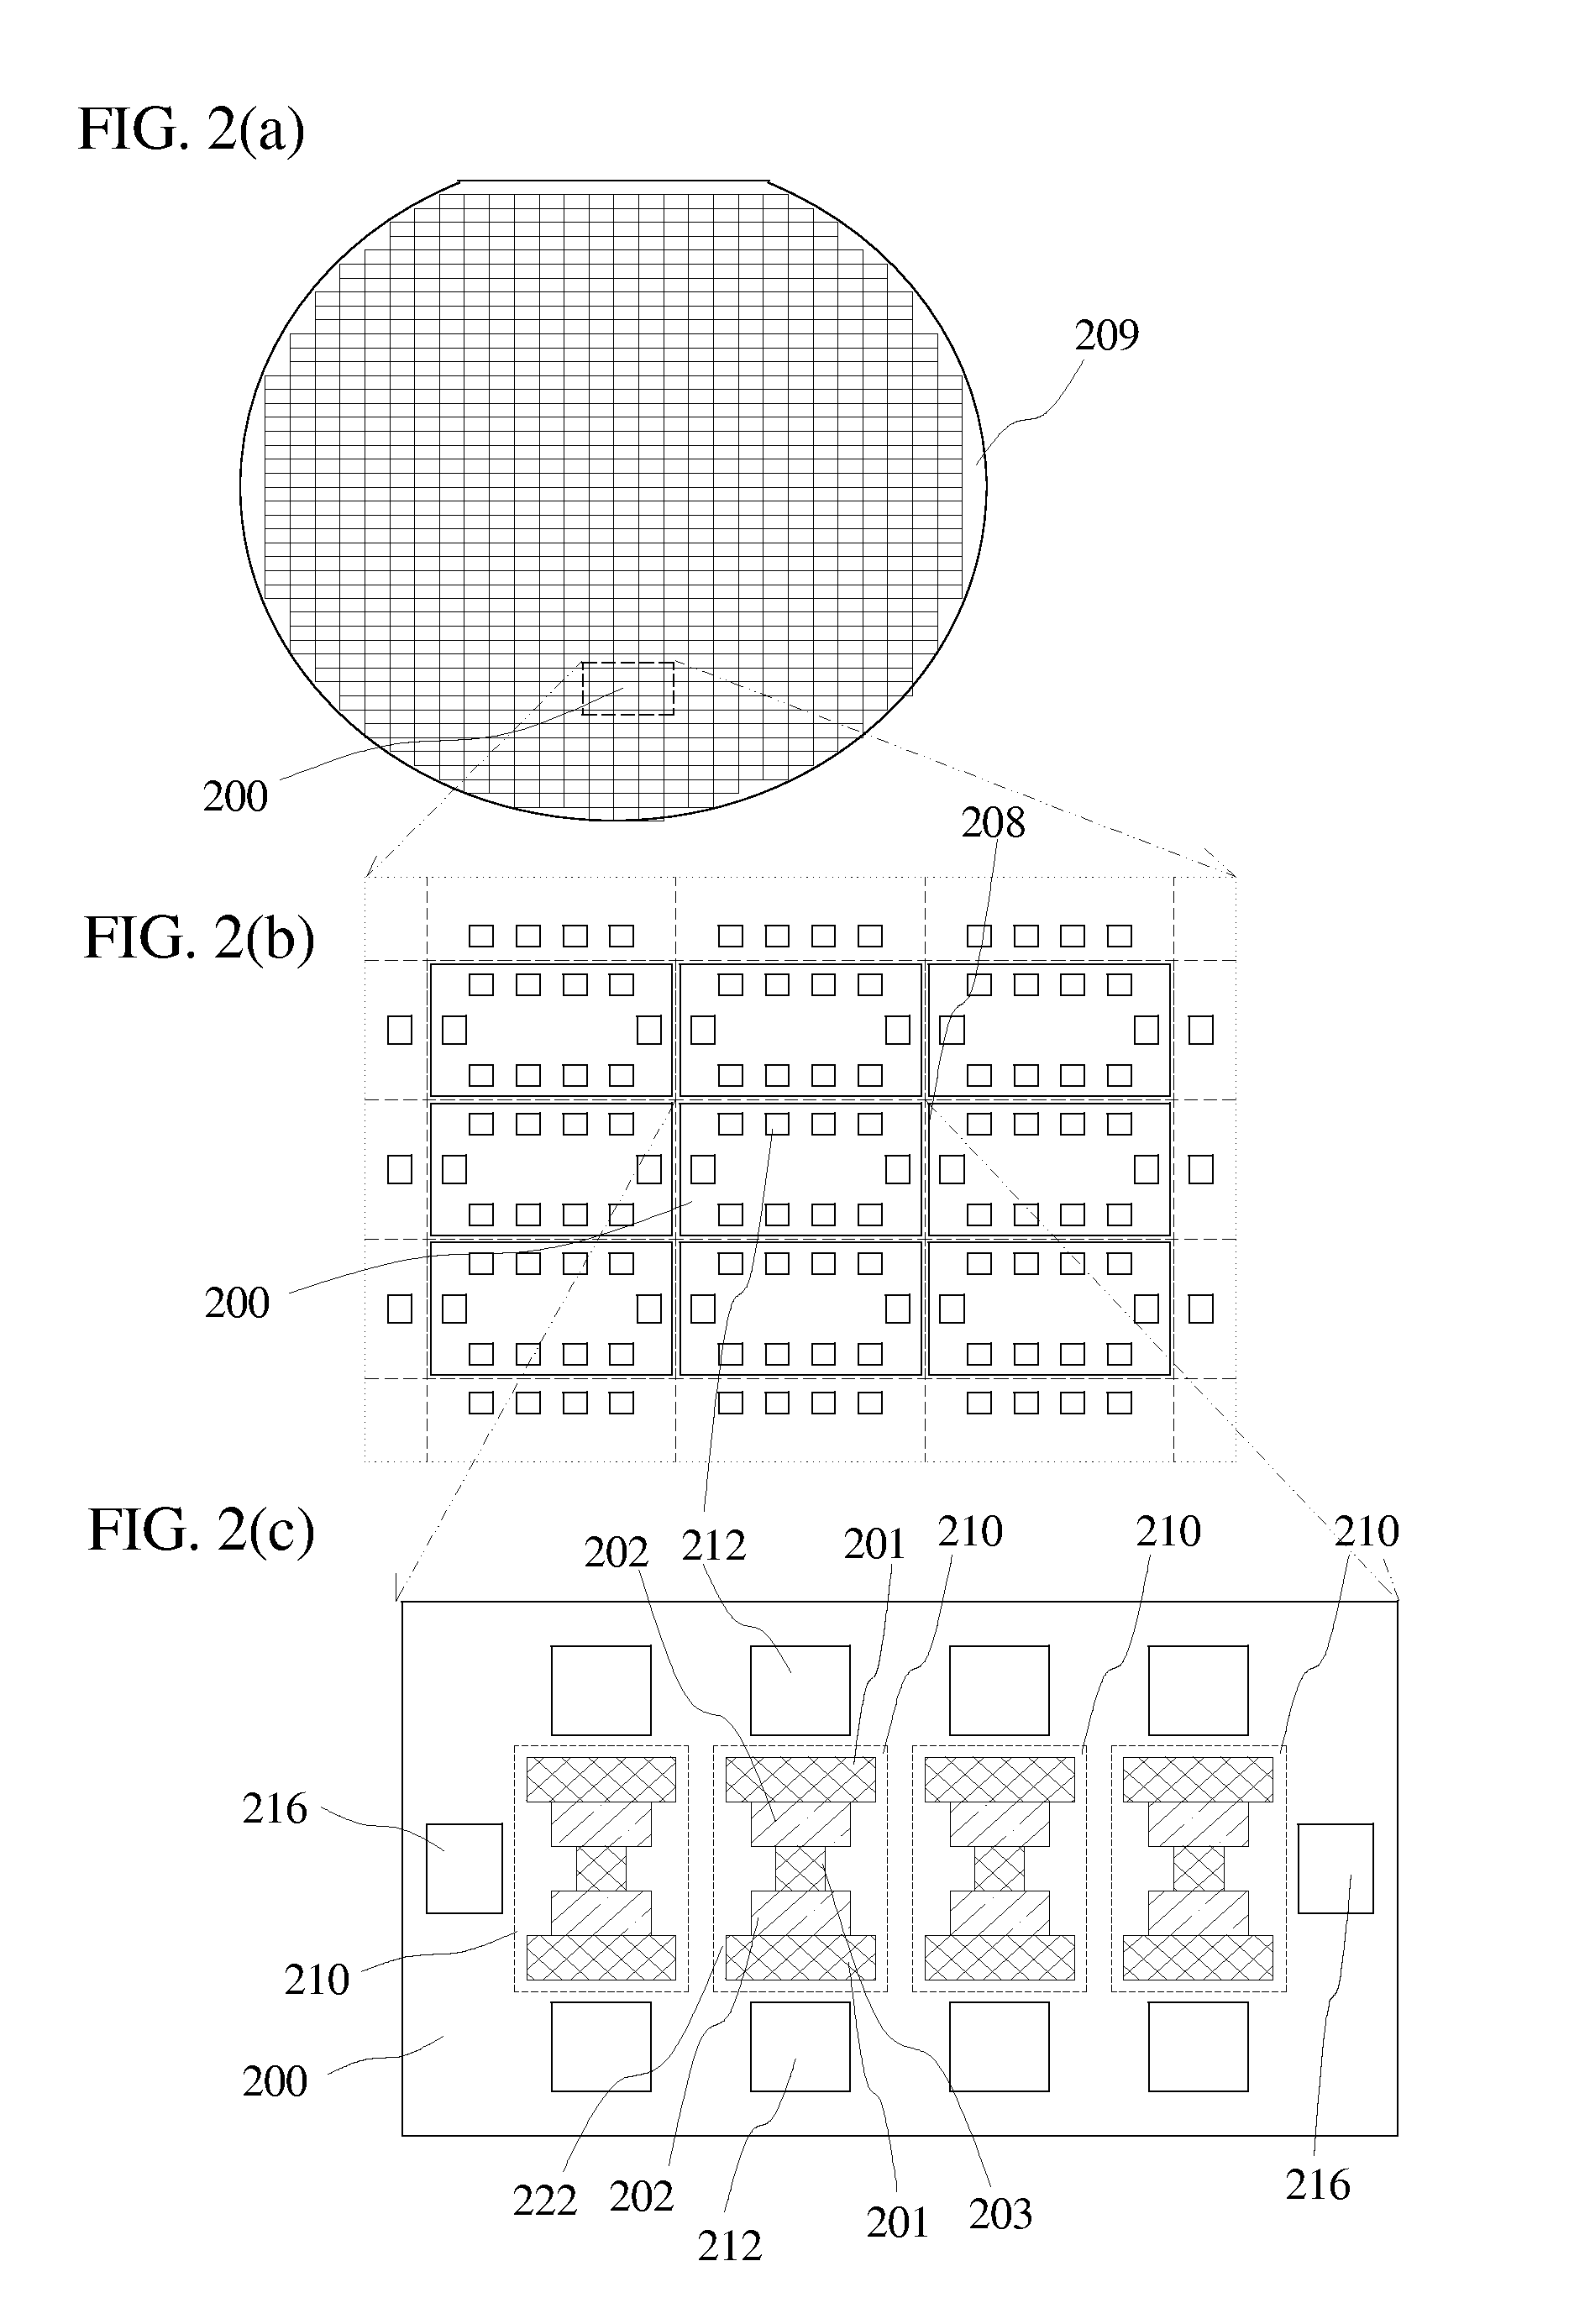 Area reduction for die-scale surface mount package chips